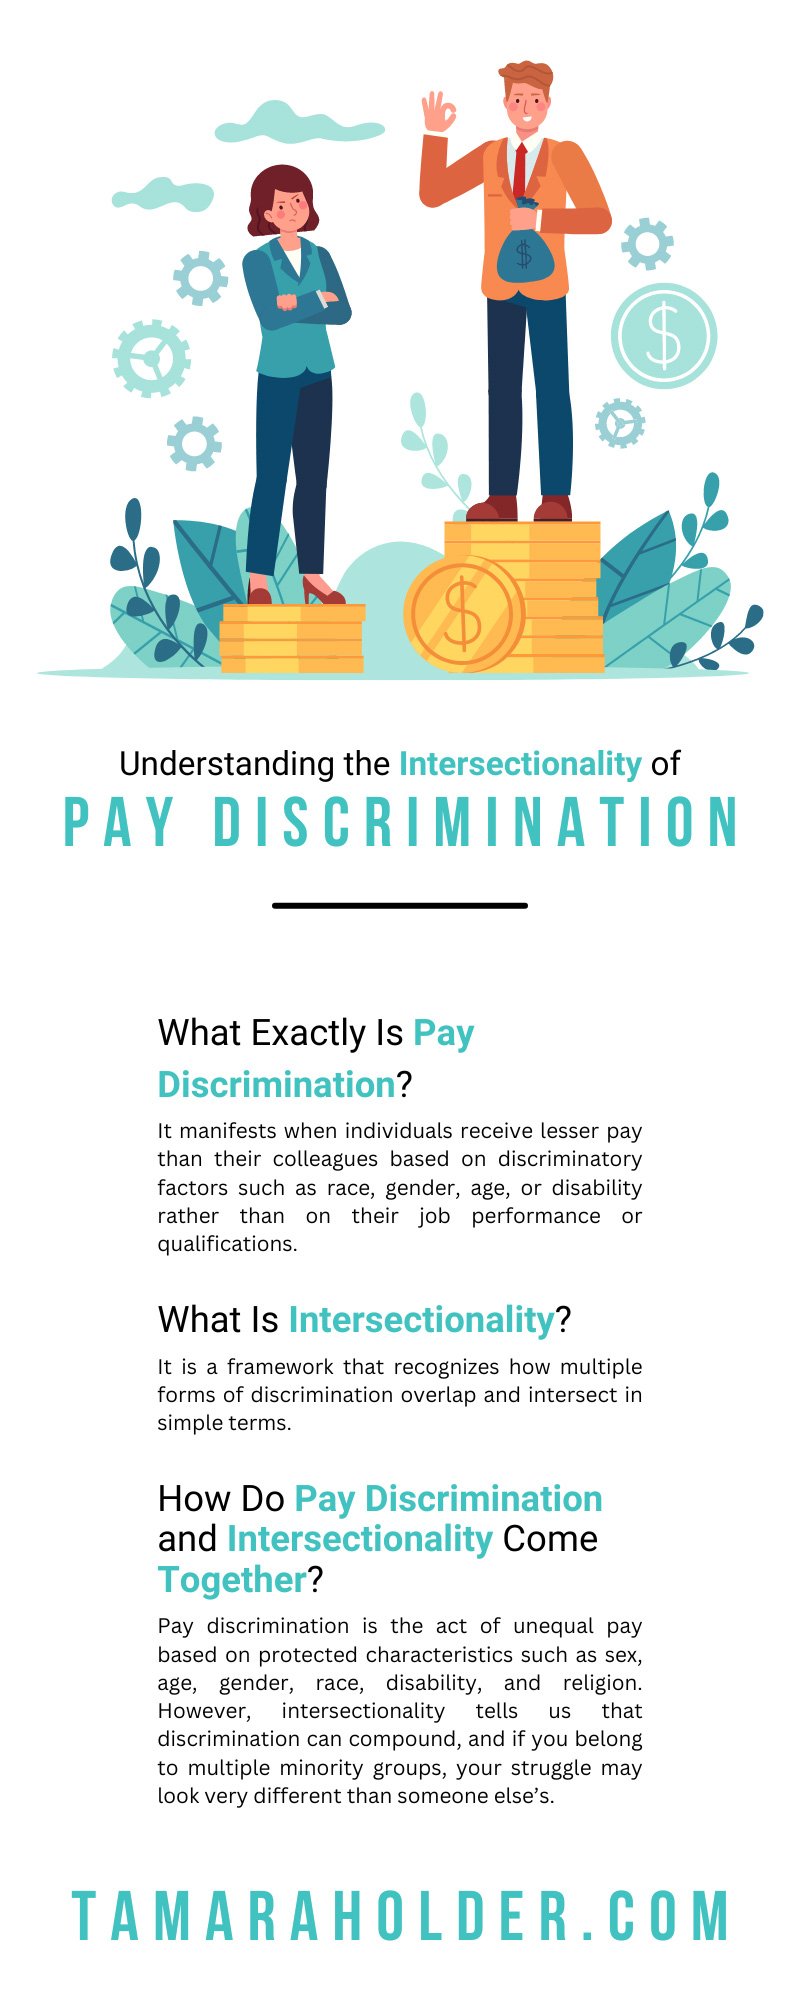 Understanding the Intersectionality of Pay Discrimination